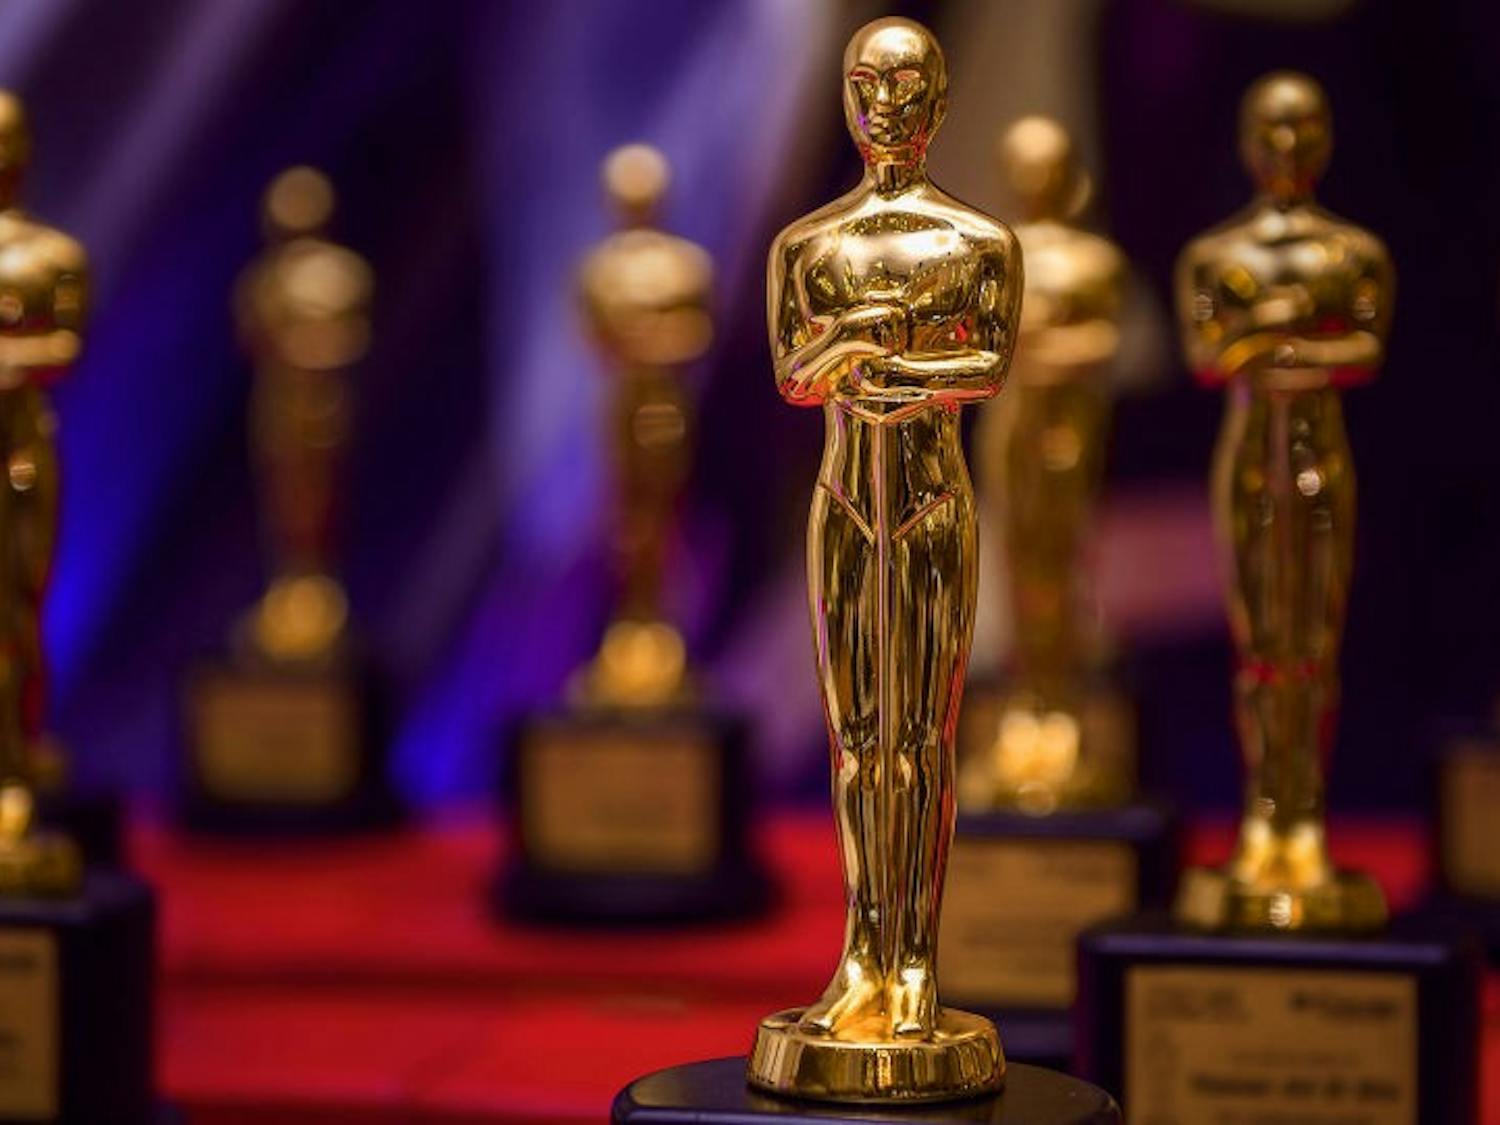 Next year's Academy Awards will be introducing some big changes. Time will tell if these changes are for the better.